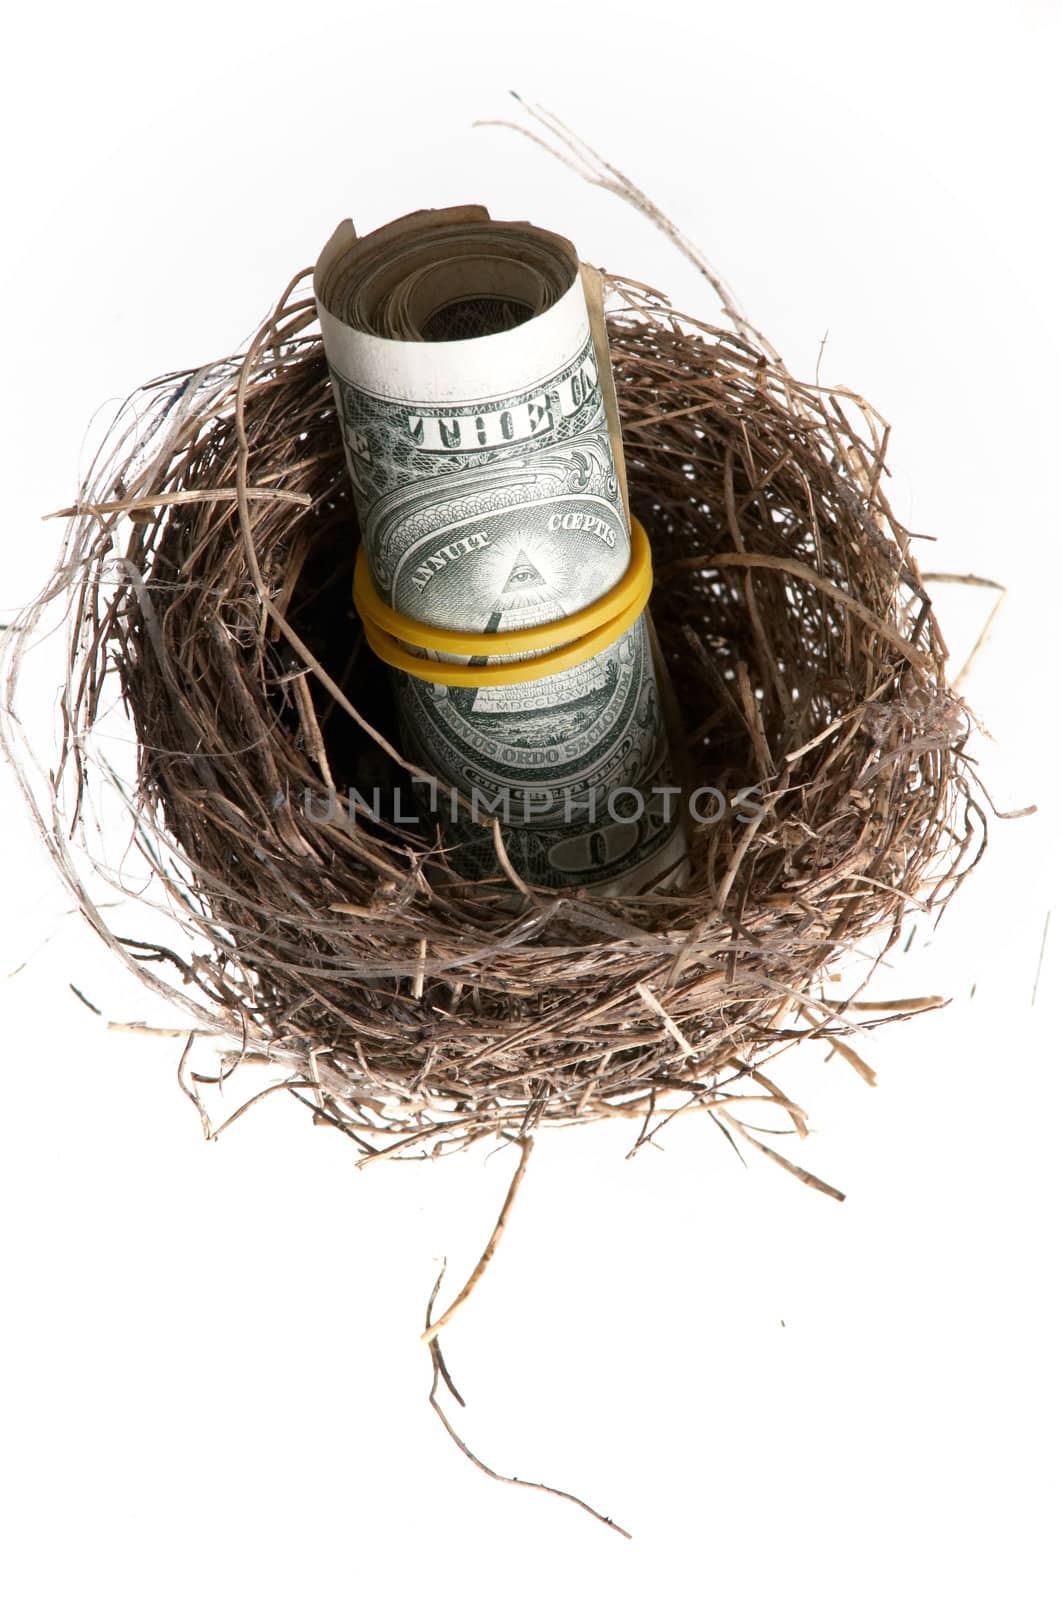 Roll of banknotes in nest. by velkol